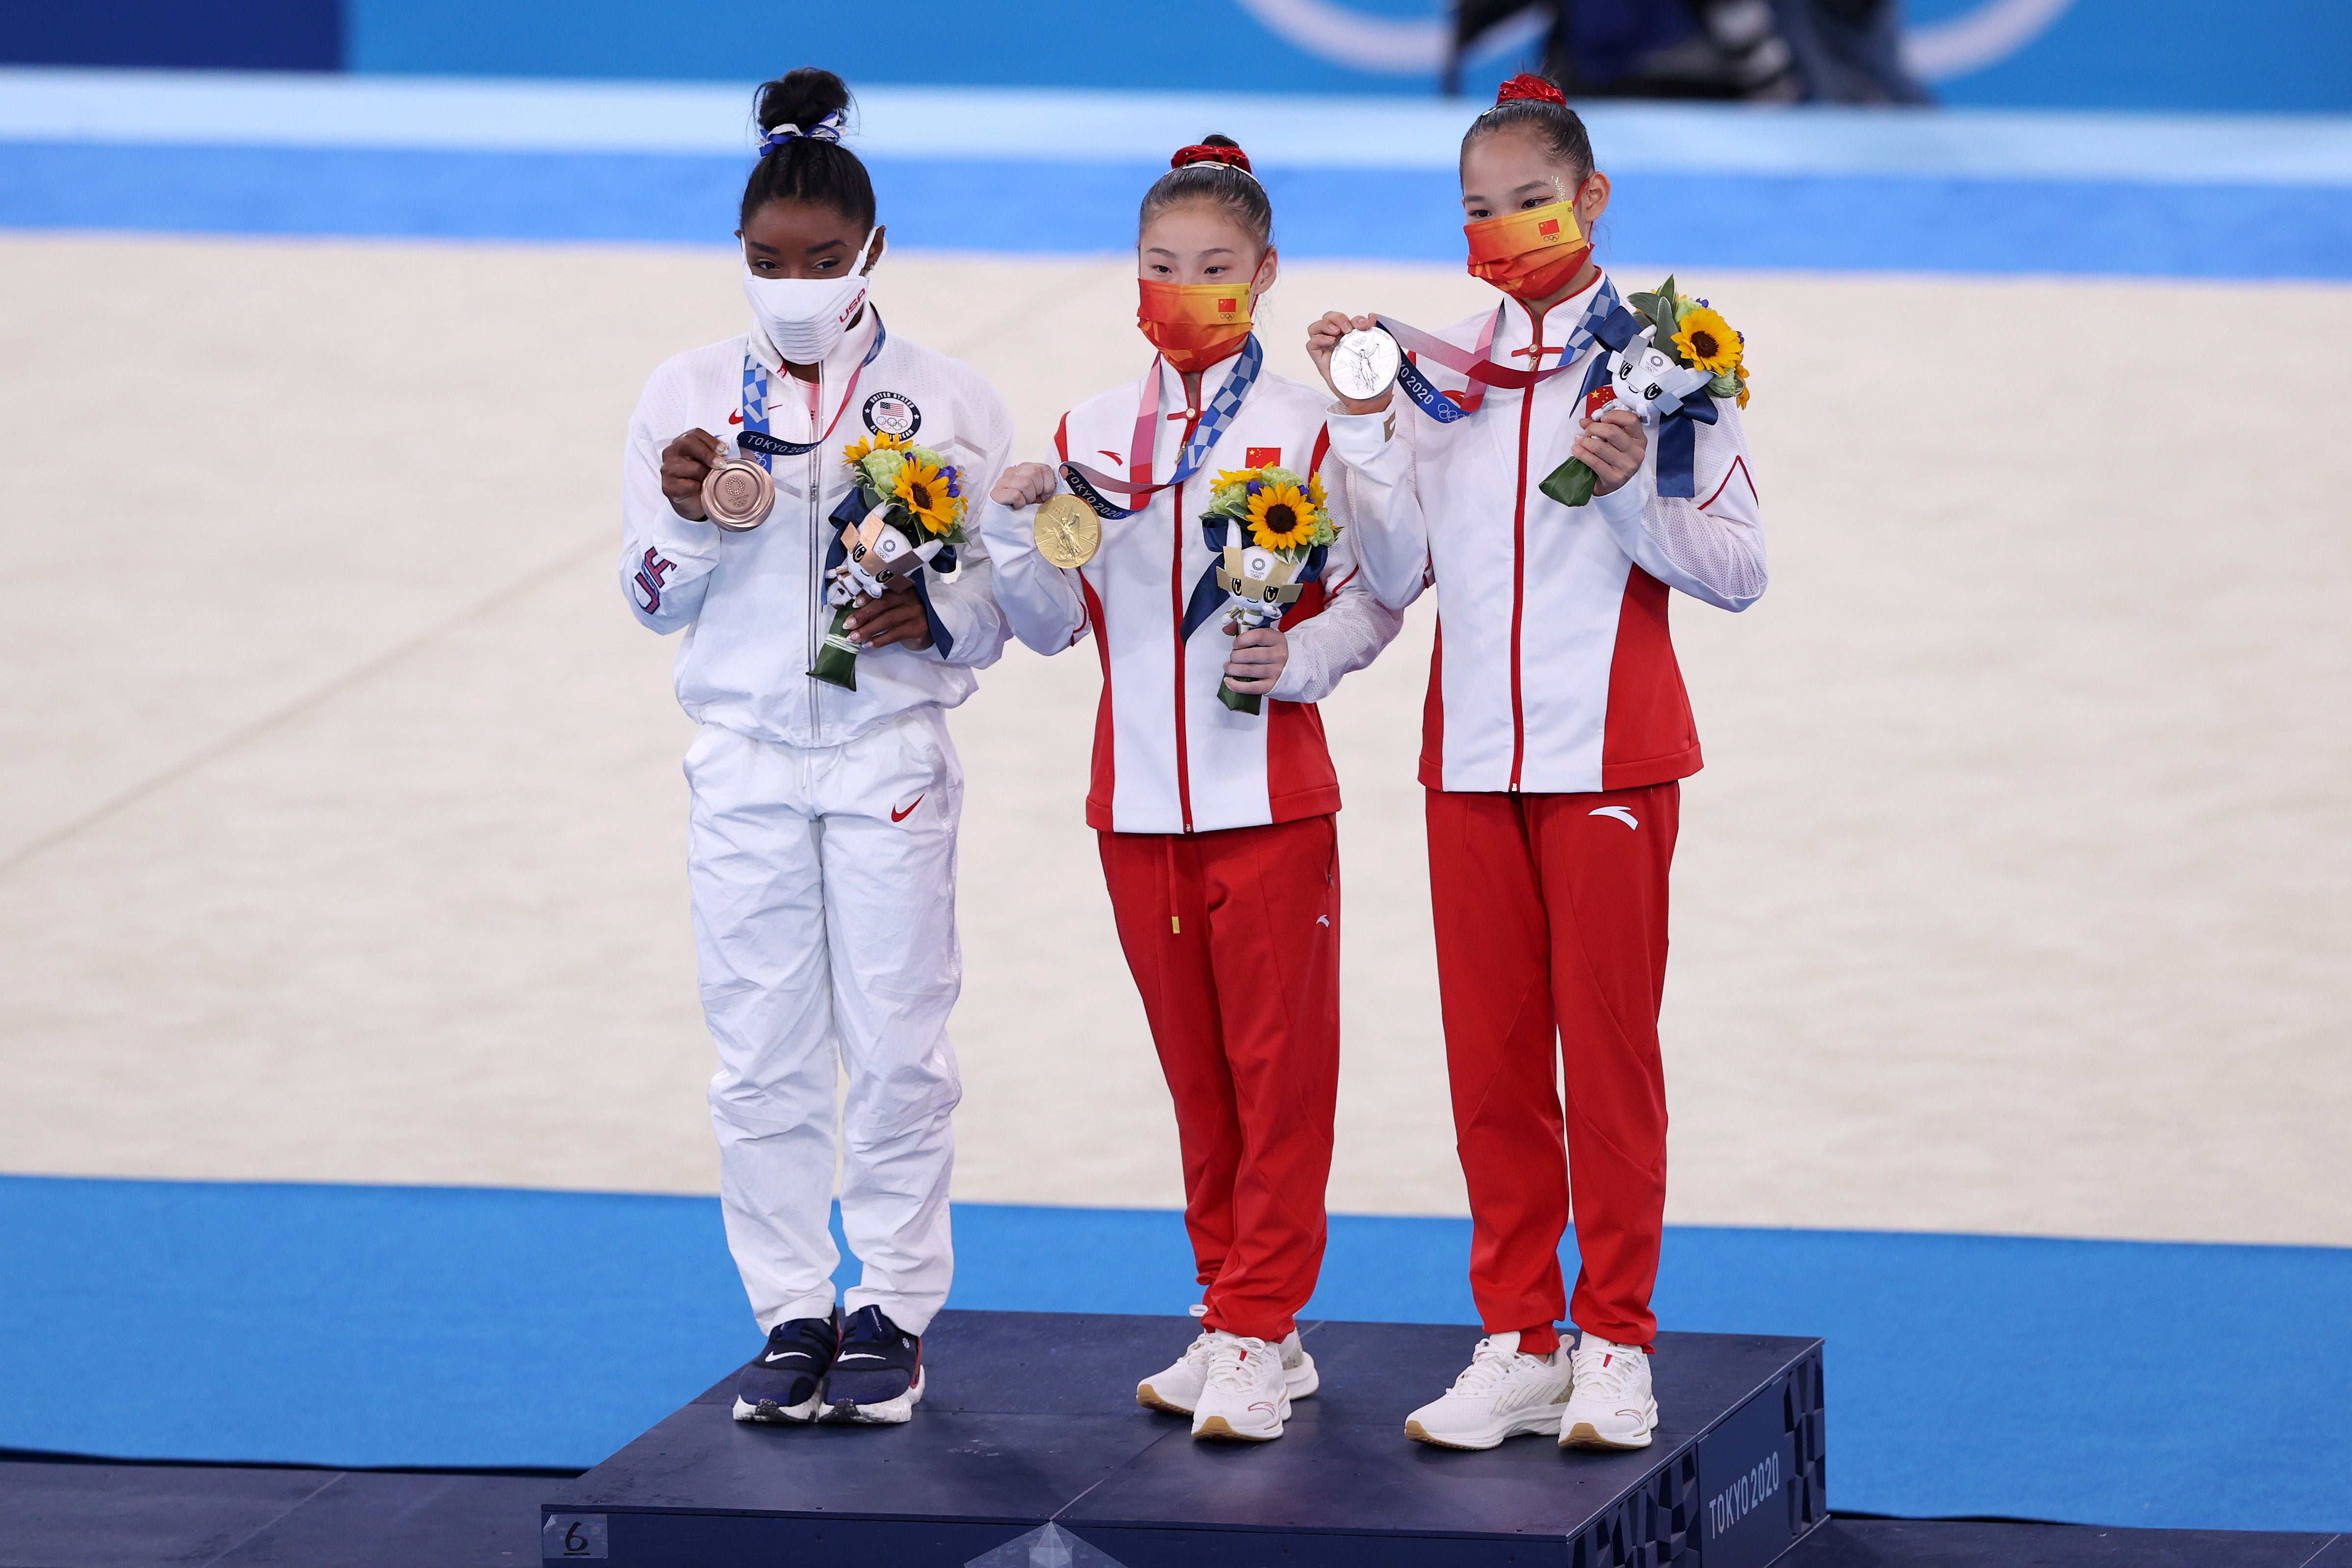 Silver medalist Xijing Tang of Team China, gold medalist Chenchen Guan of Team China and bronze medalist Simone Biles of Team United States